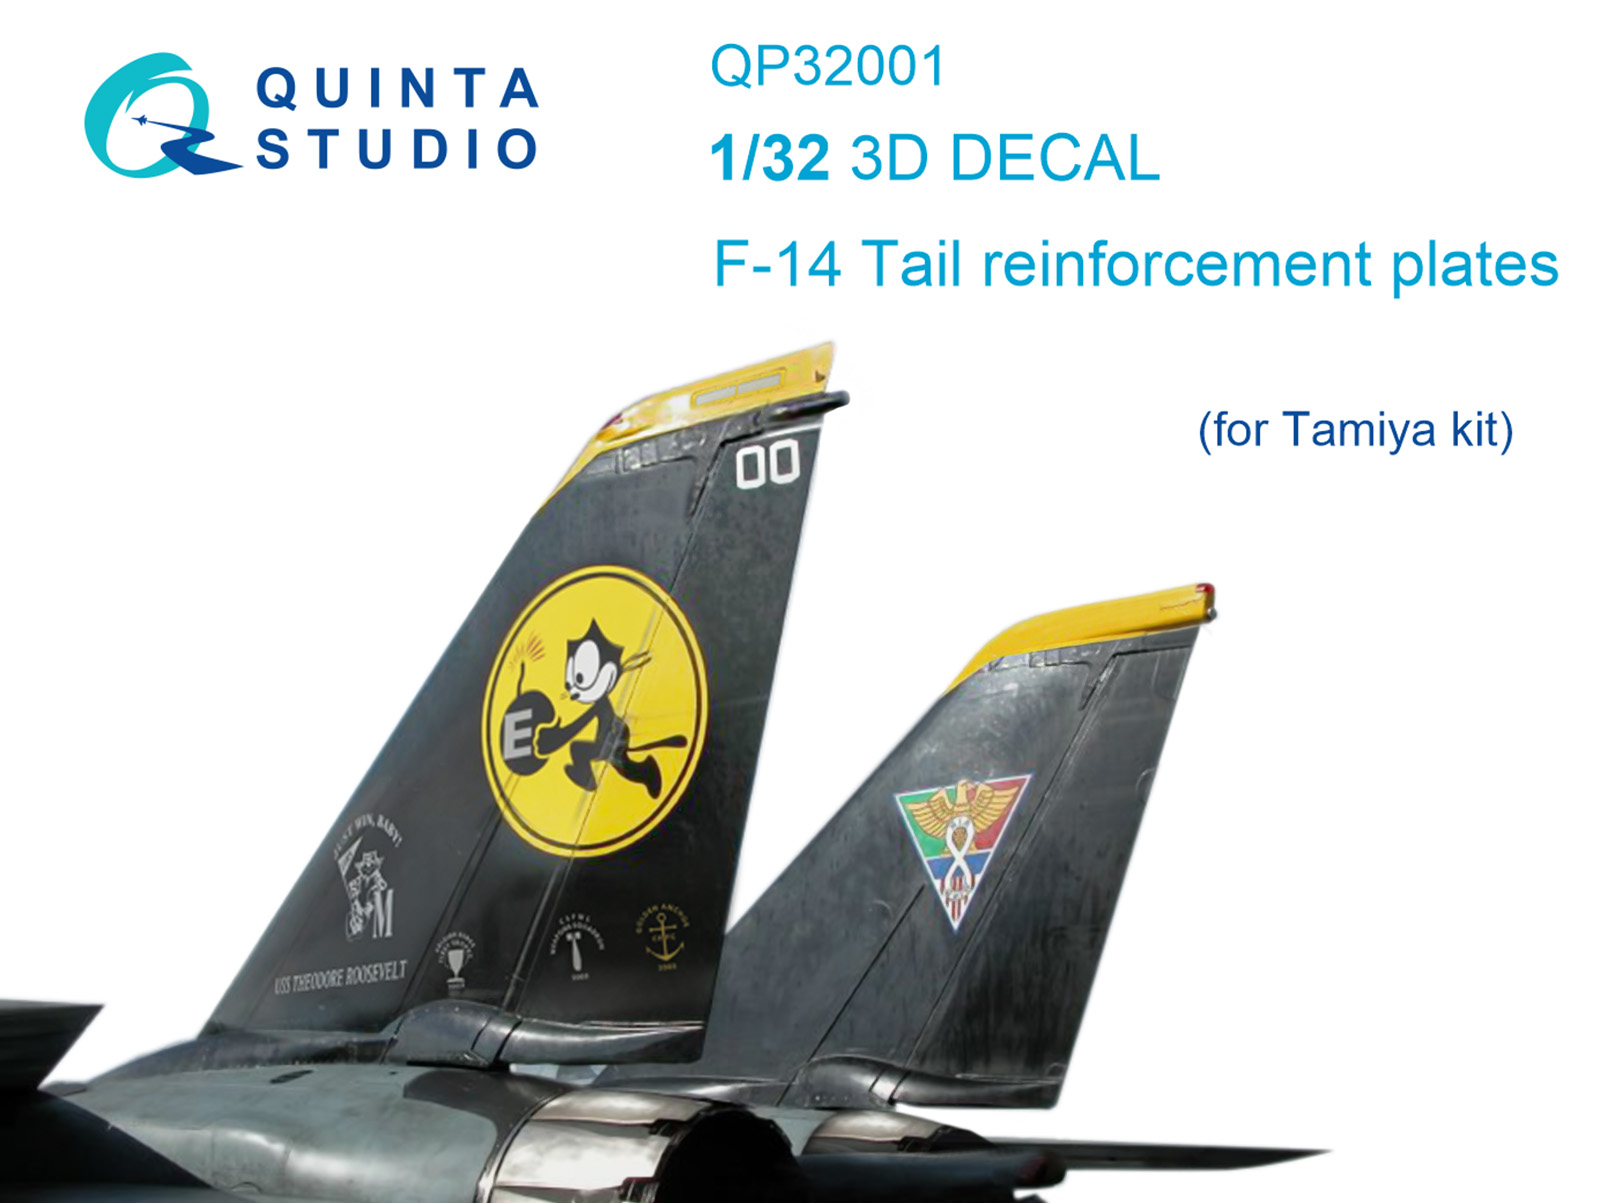 F-14 tail reinforcement plates (for Tamiya kit)